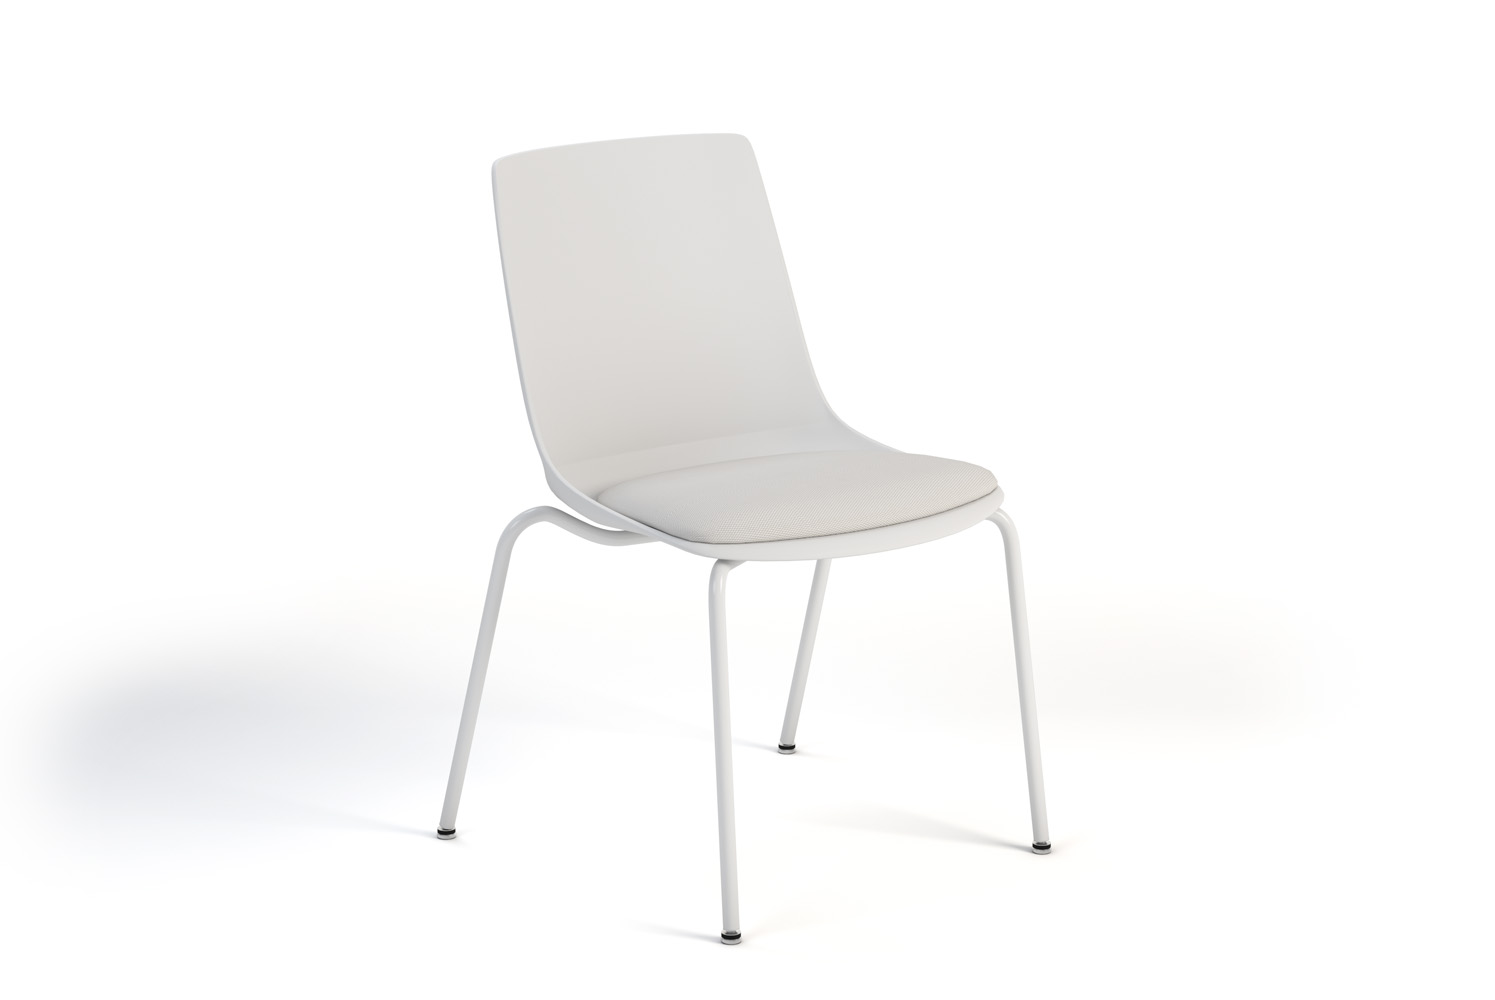 Kayden 4-leg chair with Upholstered Seat Insert